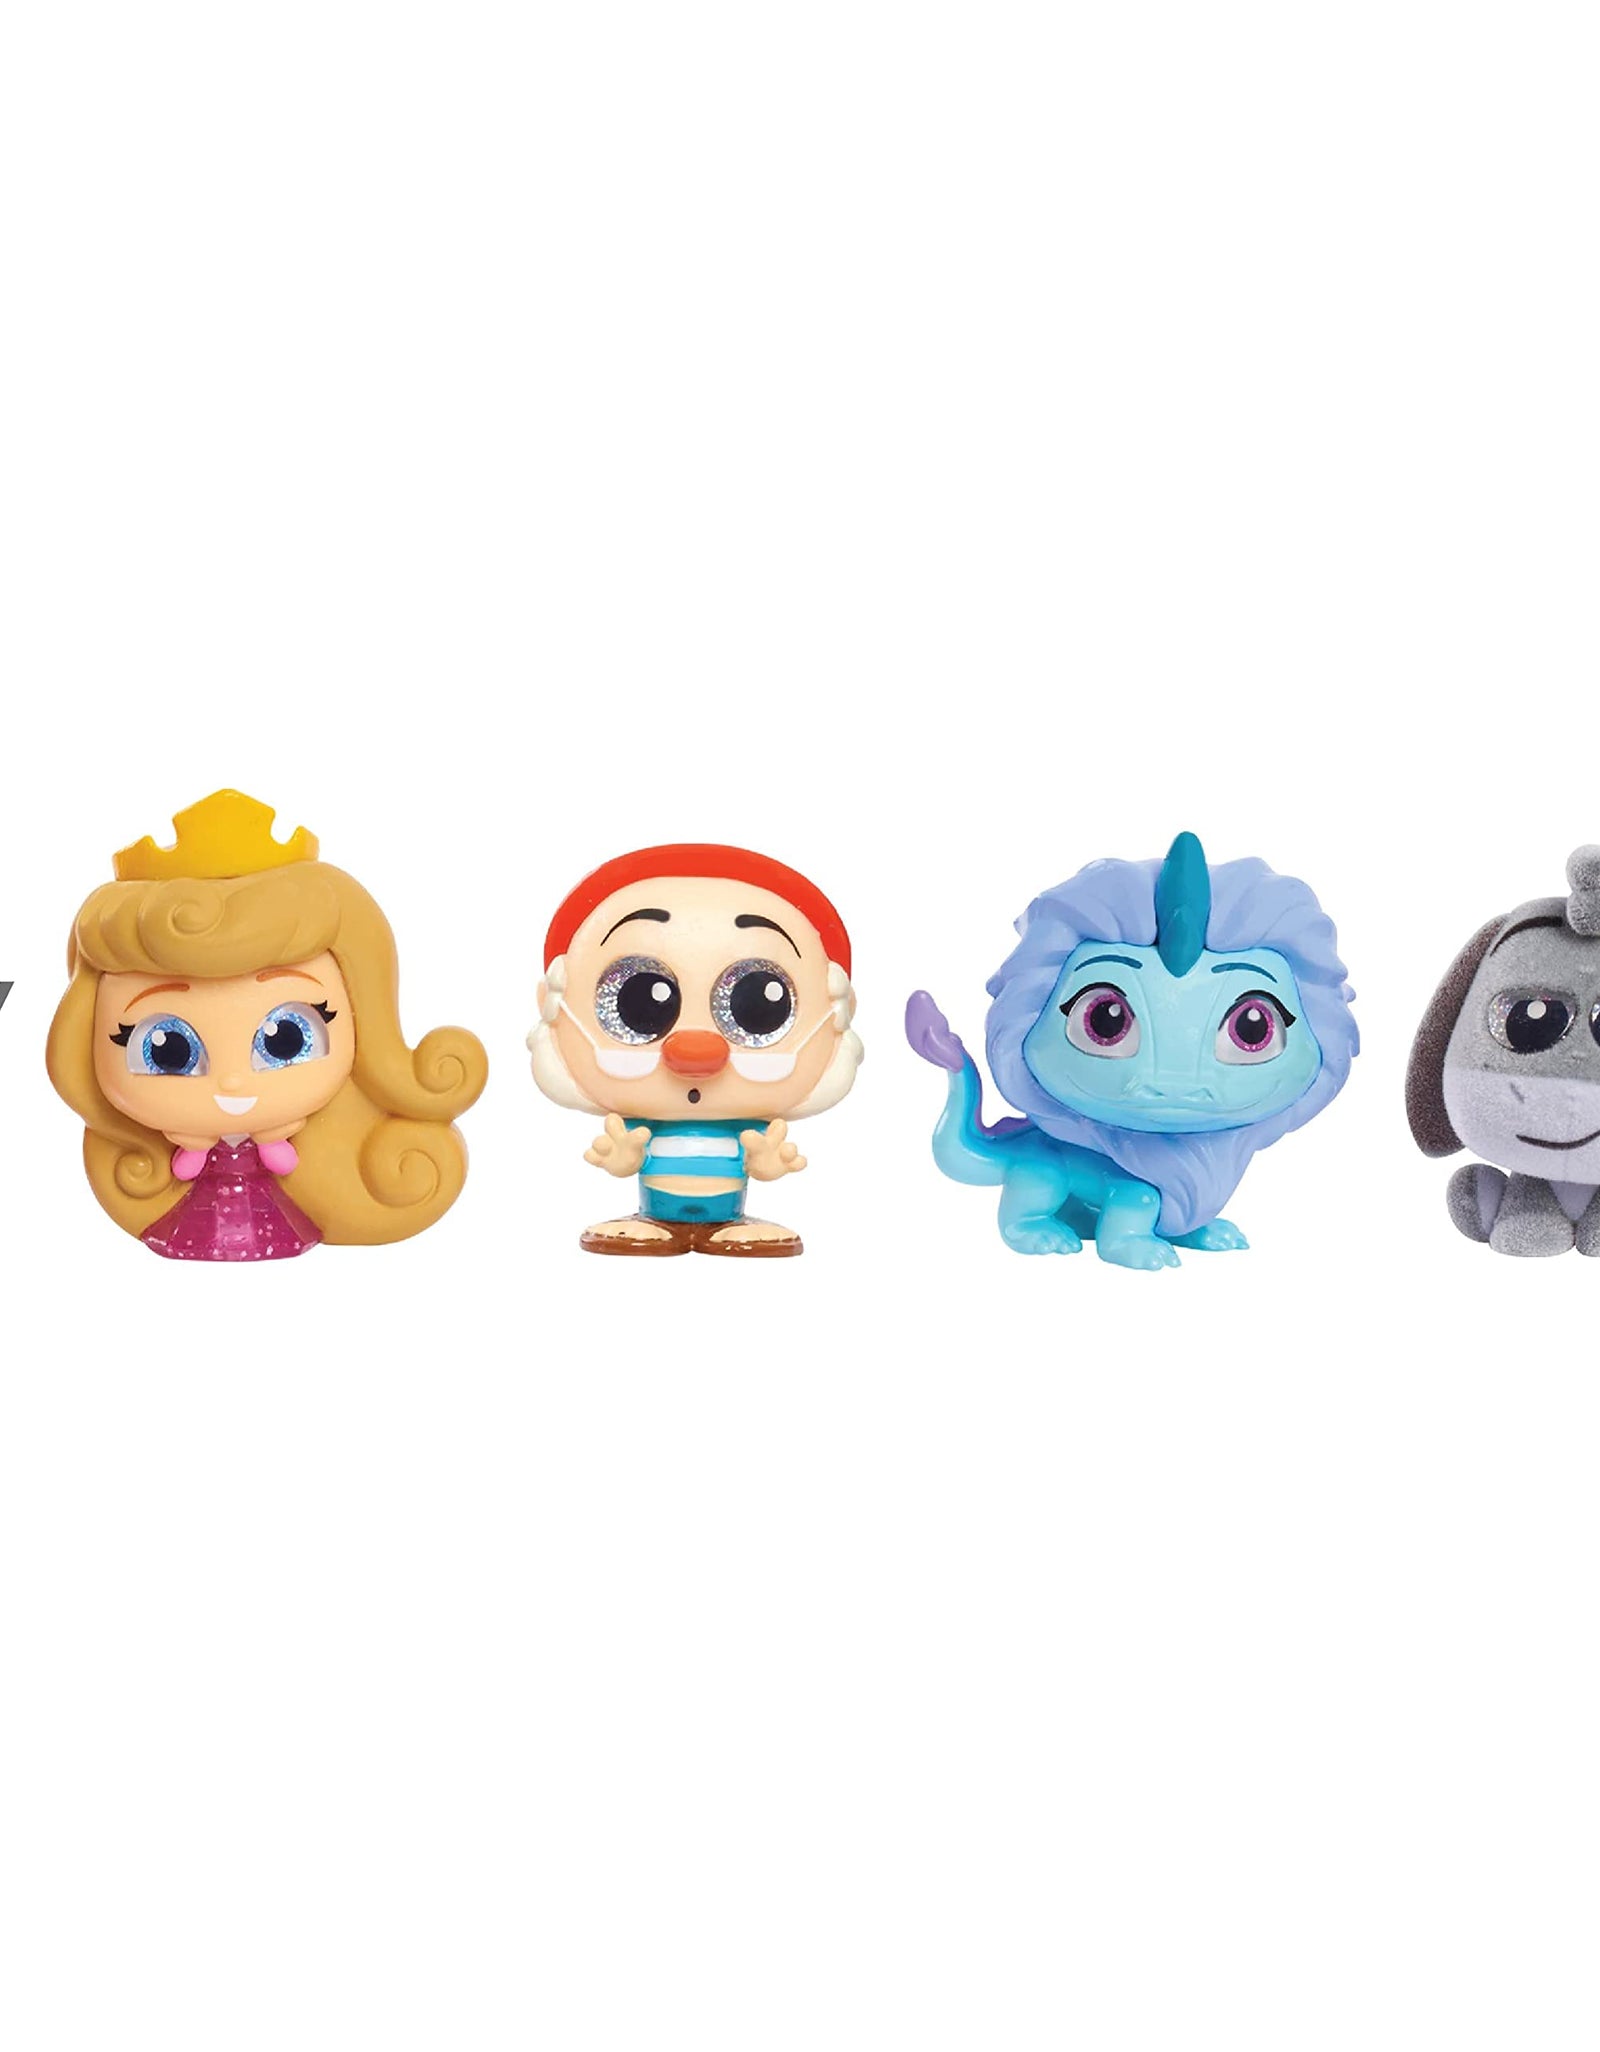 Disney Doorables Multi Peek Series 6 Jeweled Disney Princess Characters, Includes 5, 6, or 7 Collectible Mini Figures, Styles May Vary, by Just Play